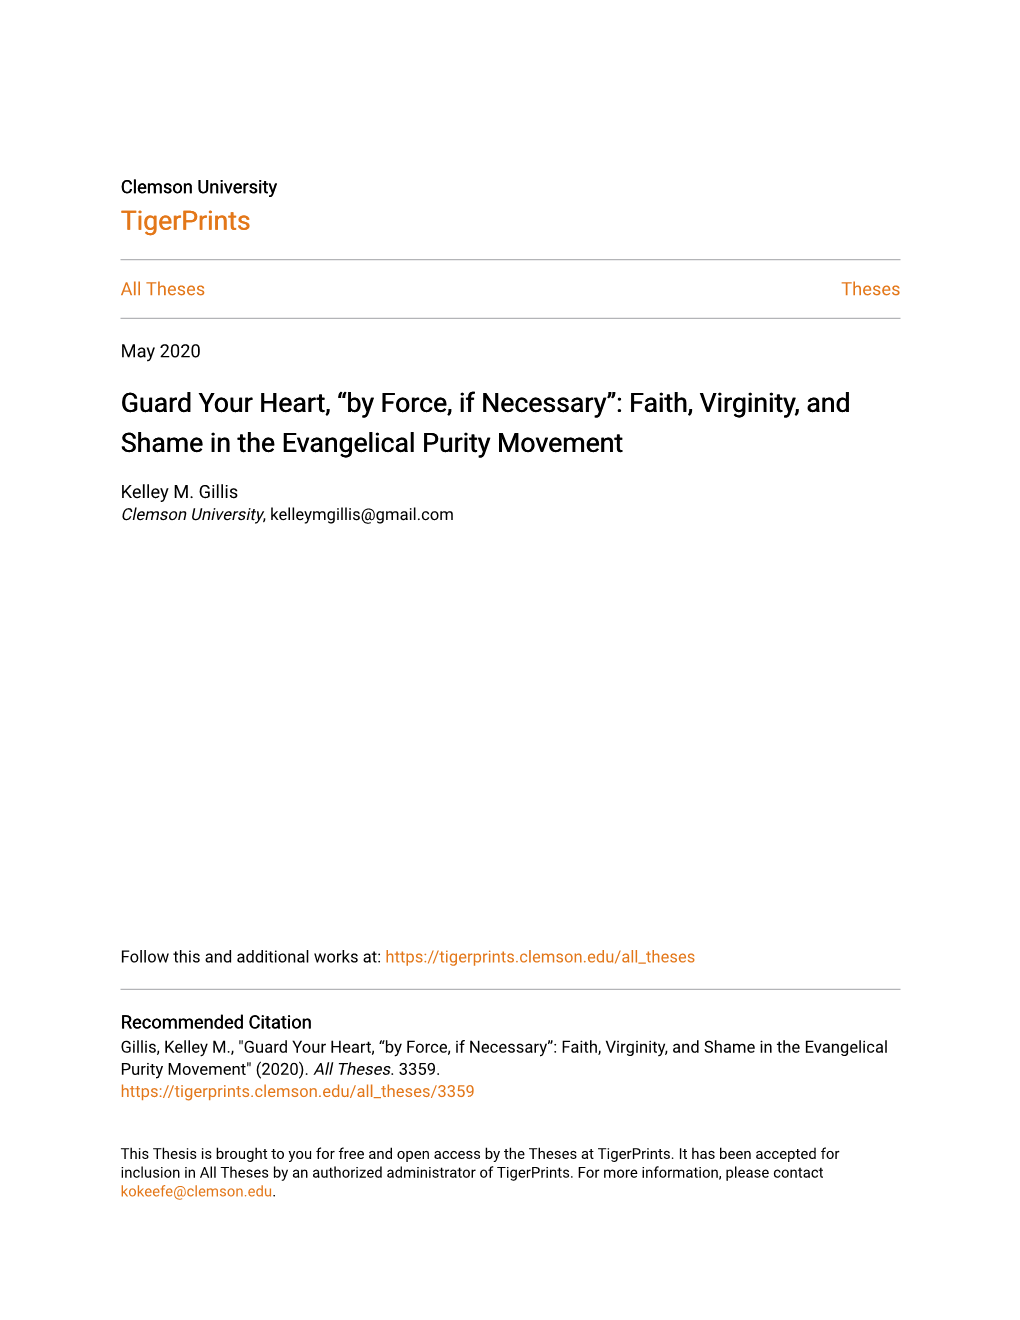 Faith, Virginity, and Shame in the Evangelical Purity Movement